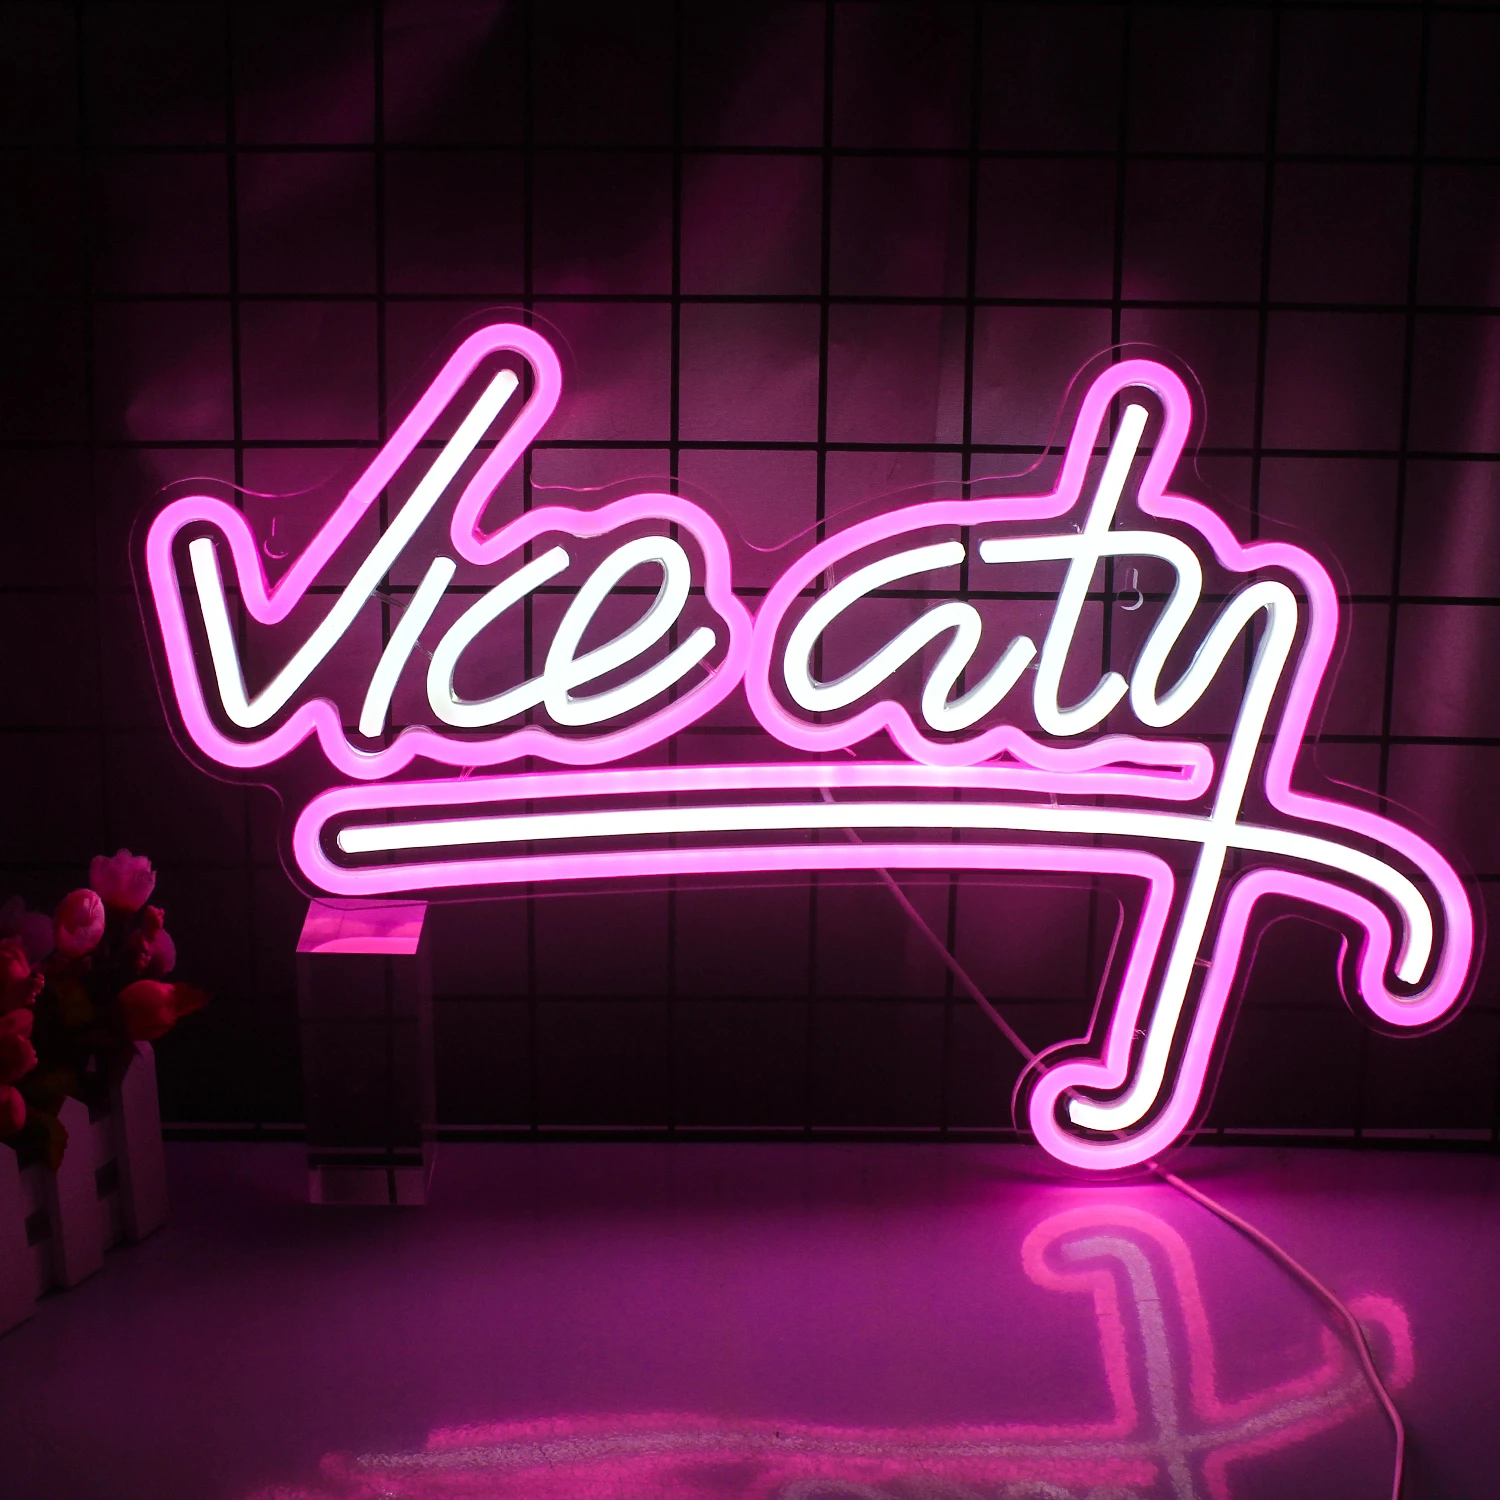 

Ineonlife Vice City Pink Neon Sign Led Lights Bedroom Letters USB Powered Game Room Bar Party Indoor Home Arcade Shop Wall Decor